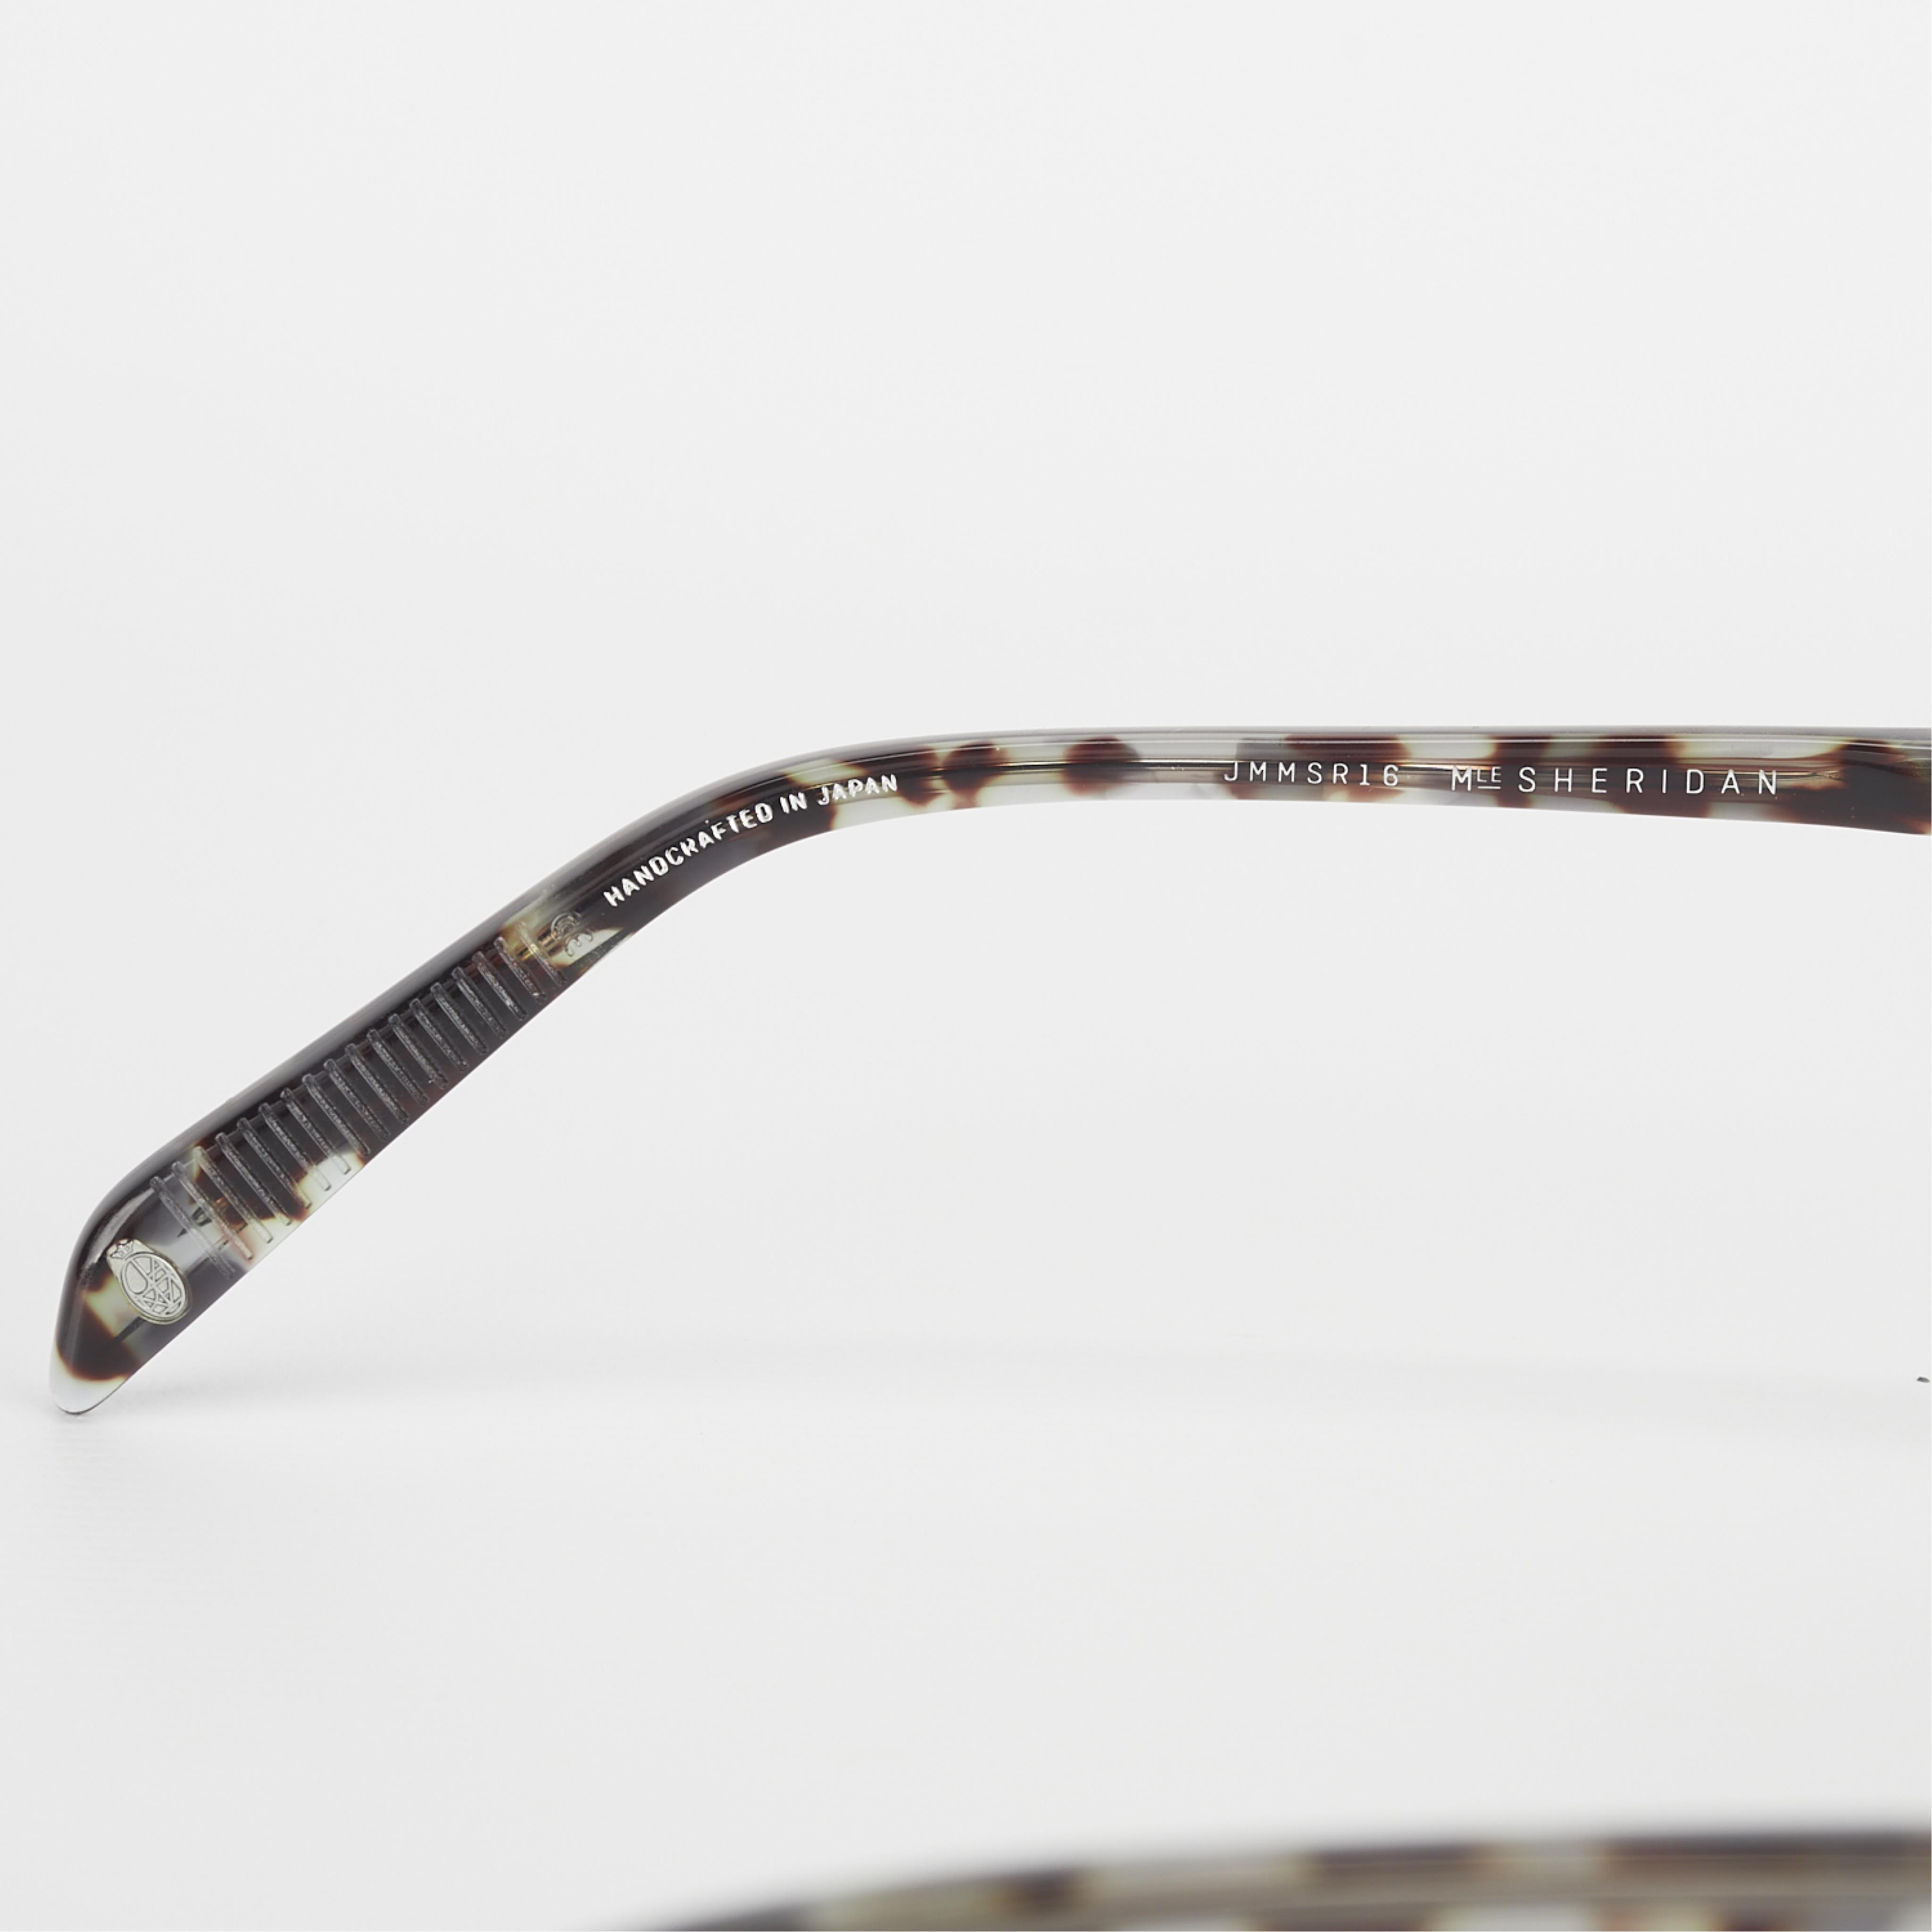 Grp 2 Jacques Marie Mage Eyeglasses - Image 15 of 18